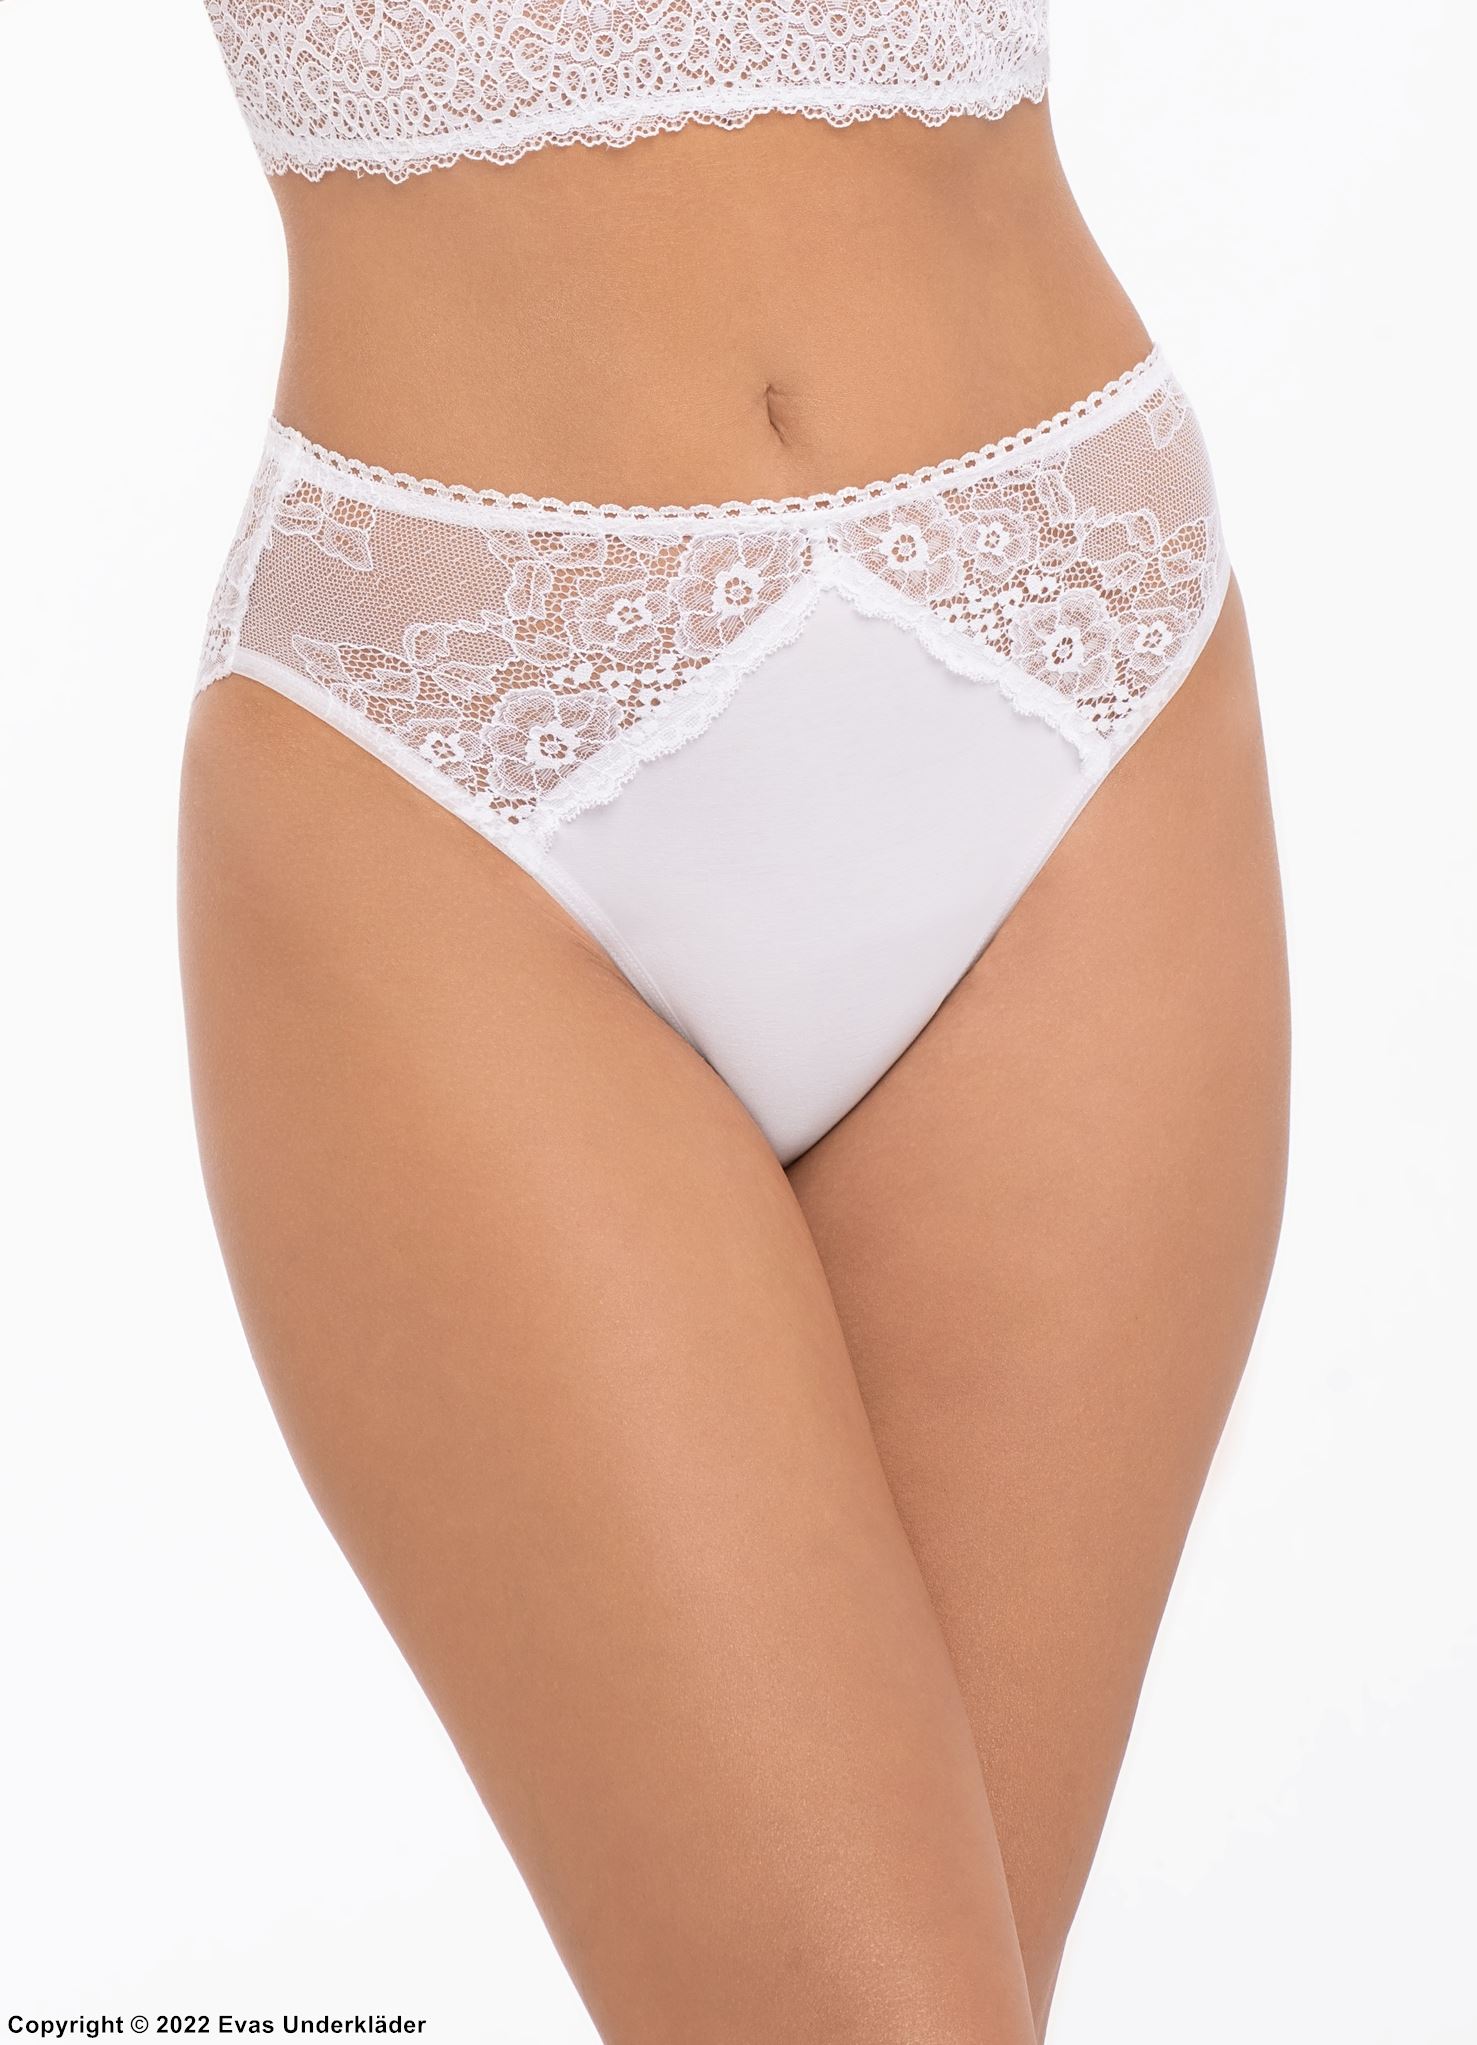 Romantic panties, high quality cotton, lace inlays, slightly higher waist